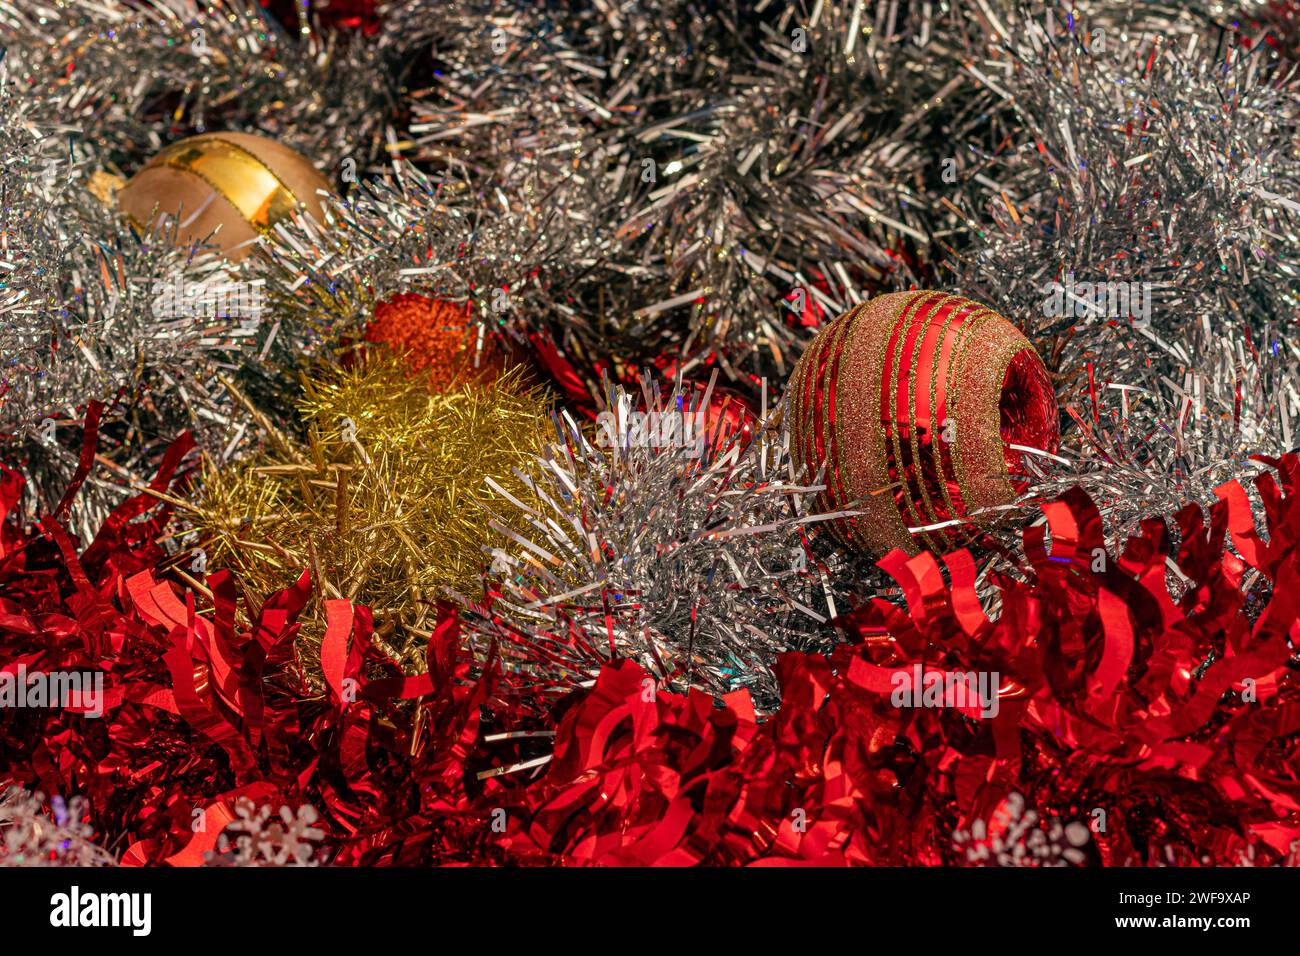 Festive Christmas decorations with colorful tinsel and glittering baubles Stock Photo